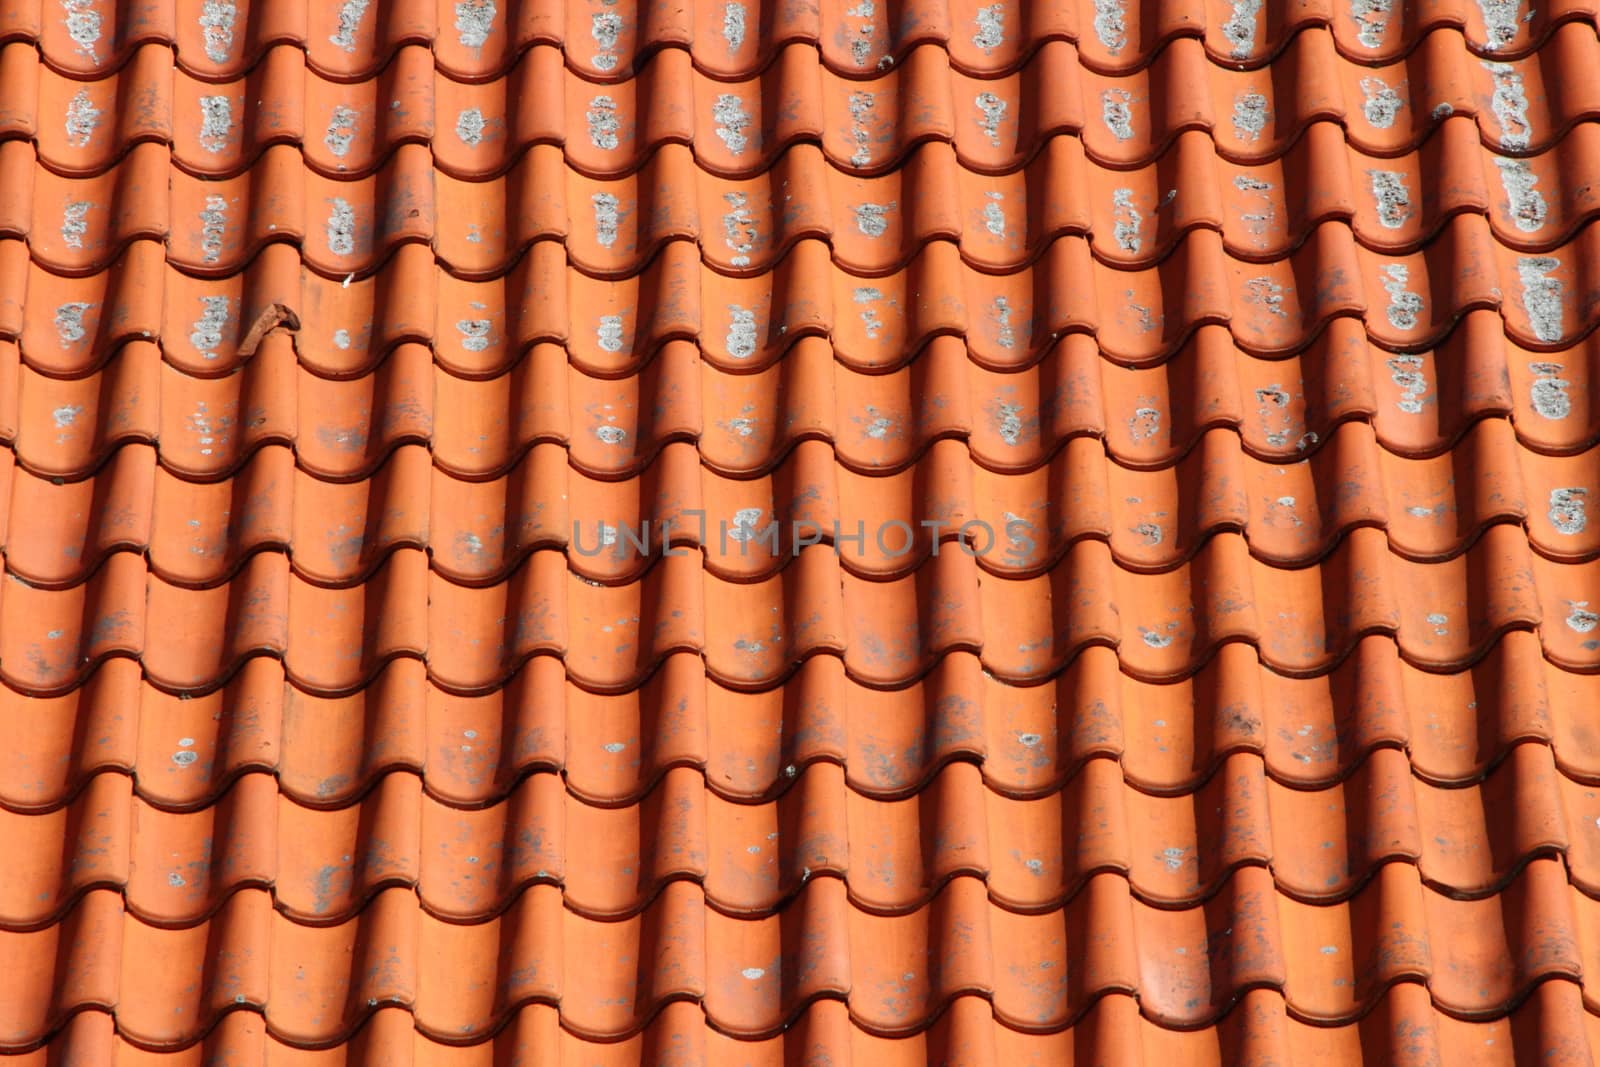 Red Clay Tile Roof on Old Farm House in Horizontal Perspective